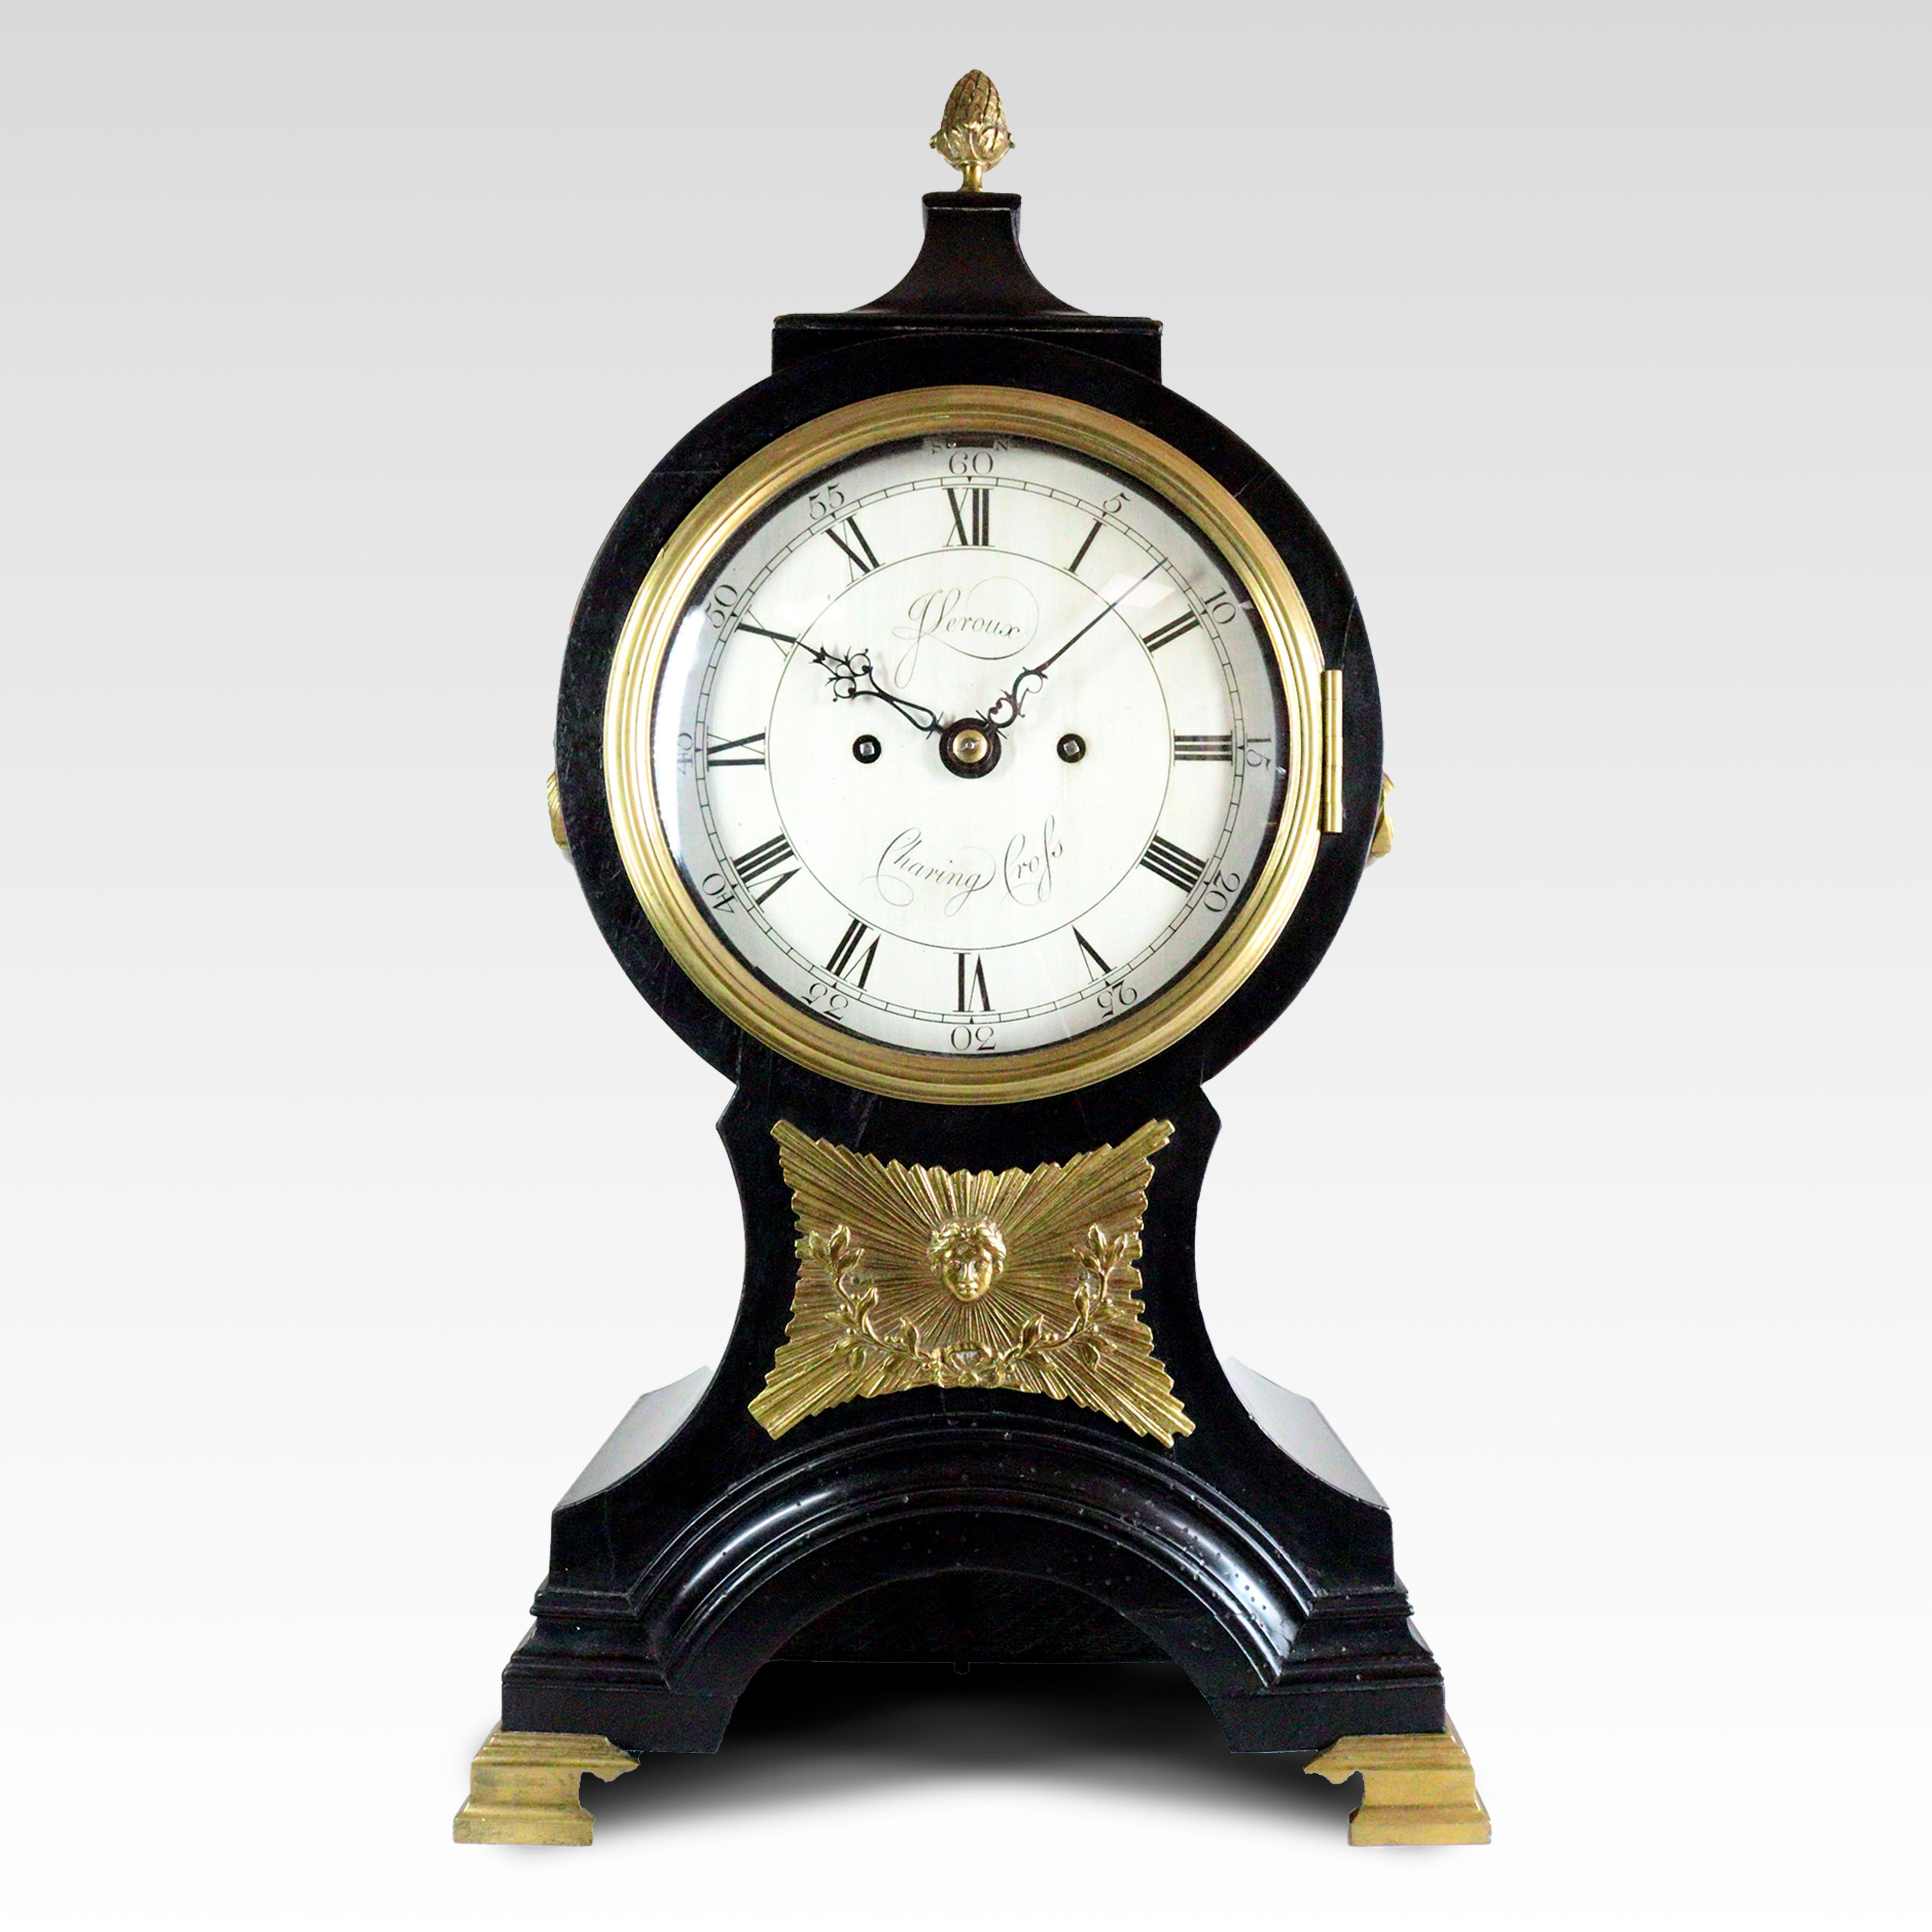 An 18th century balloon shaped bracket or table clock by John Leroux of Charing Cross, dating from circa 1790. The waisted case surmounted by a brass pineapple finial over a drum housing the movement. The dial is behind a hinged convex glazed cast